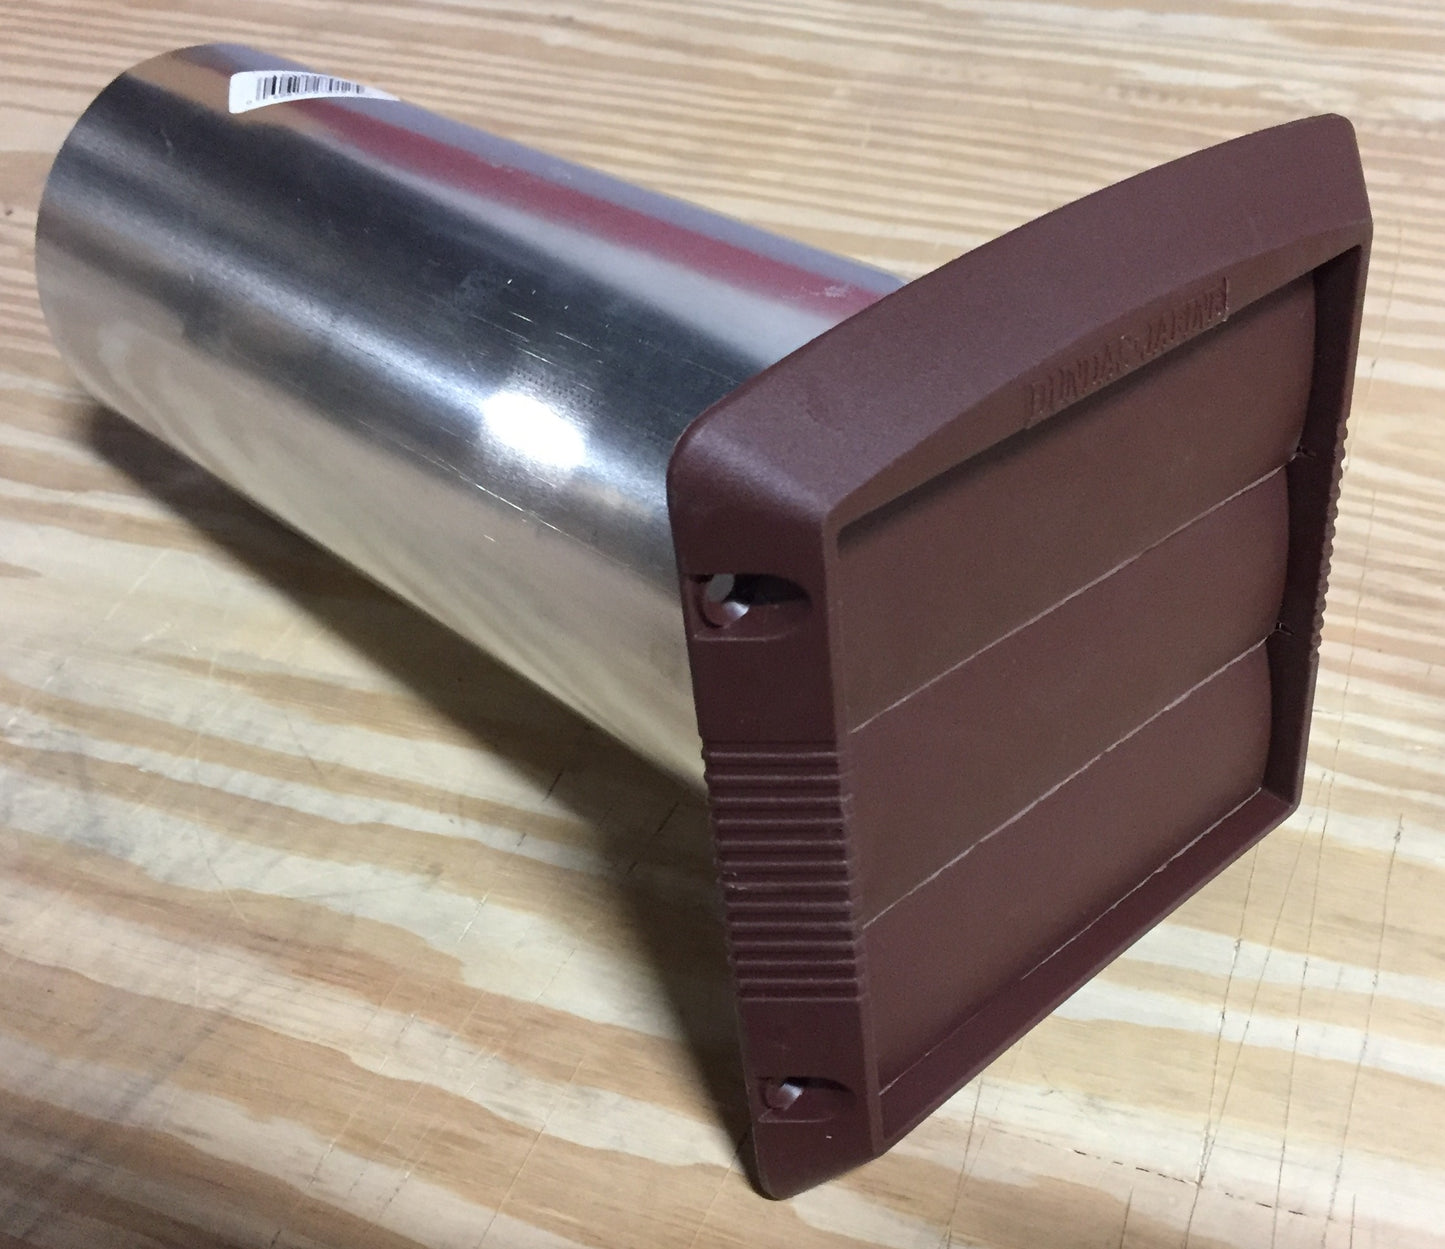 4" ALUMINUM DRYER VENT HOOD WITH BROWN PLASTIC GRILLE